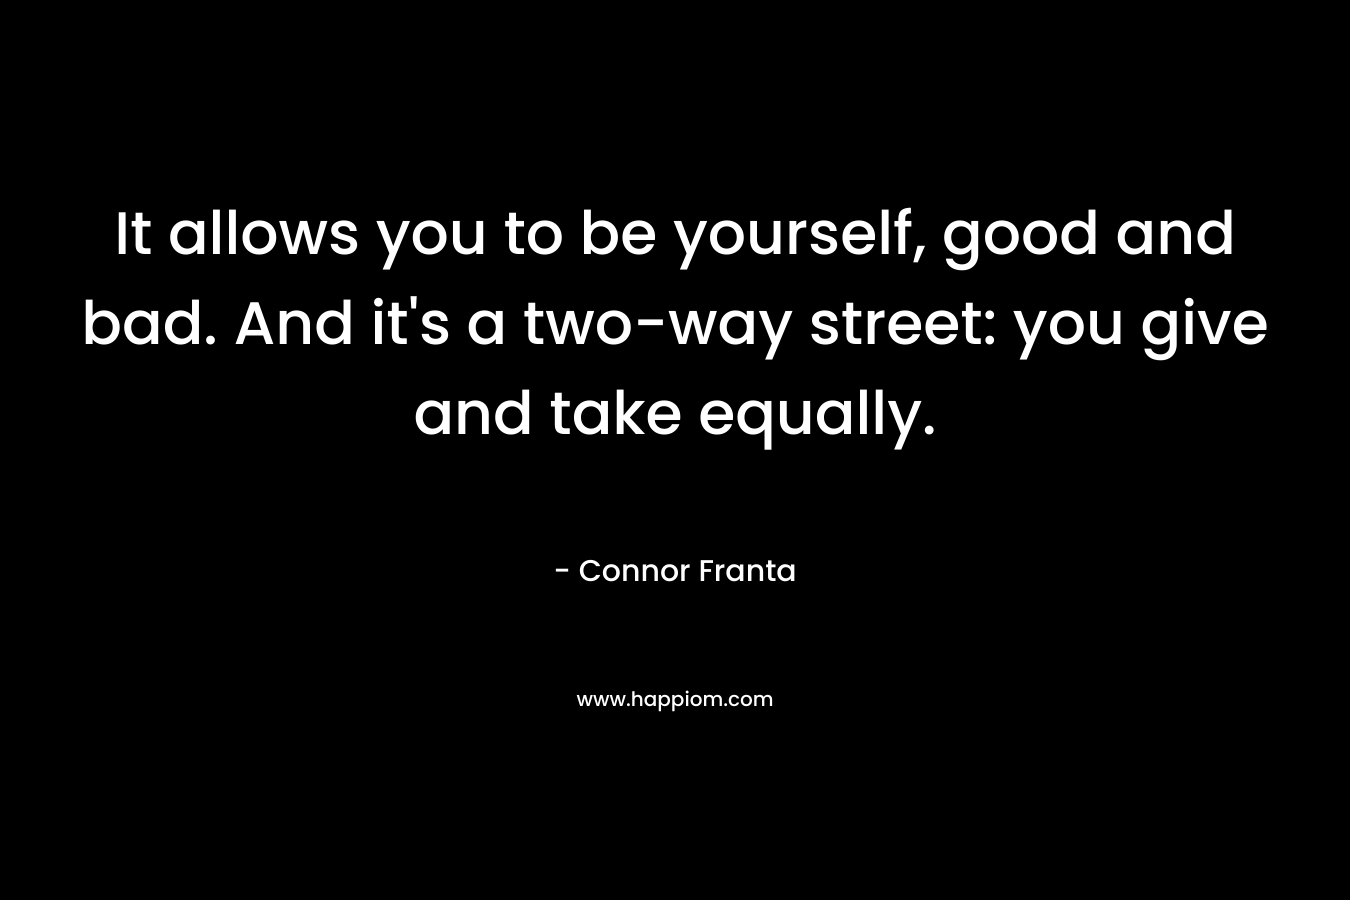 It allows you to be yourself, good and bad. And it’s a two-way street: you give and take equally. – Connor Franta